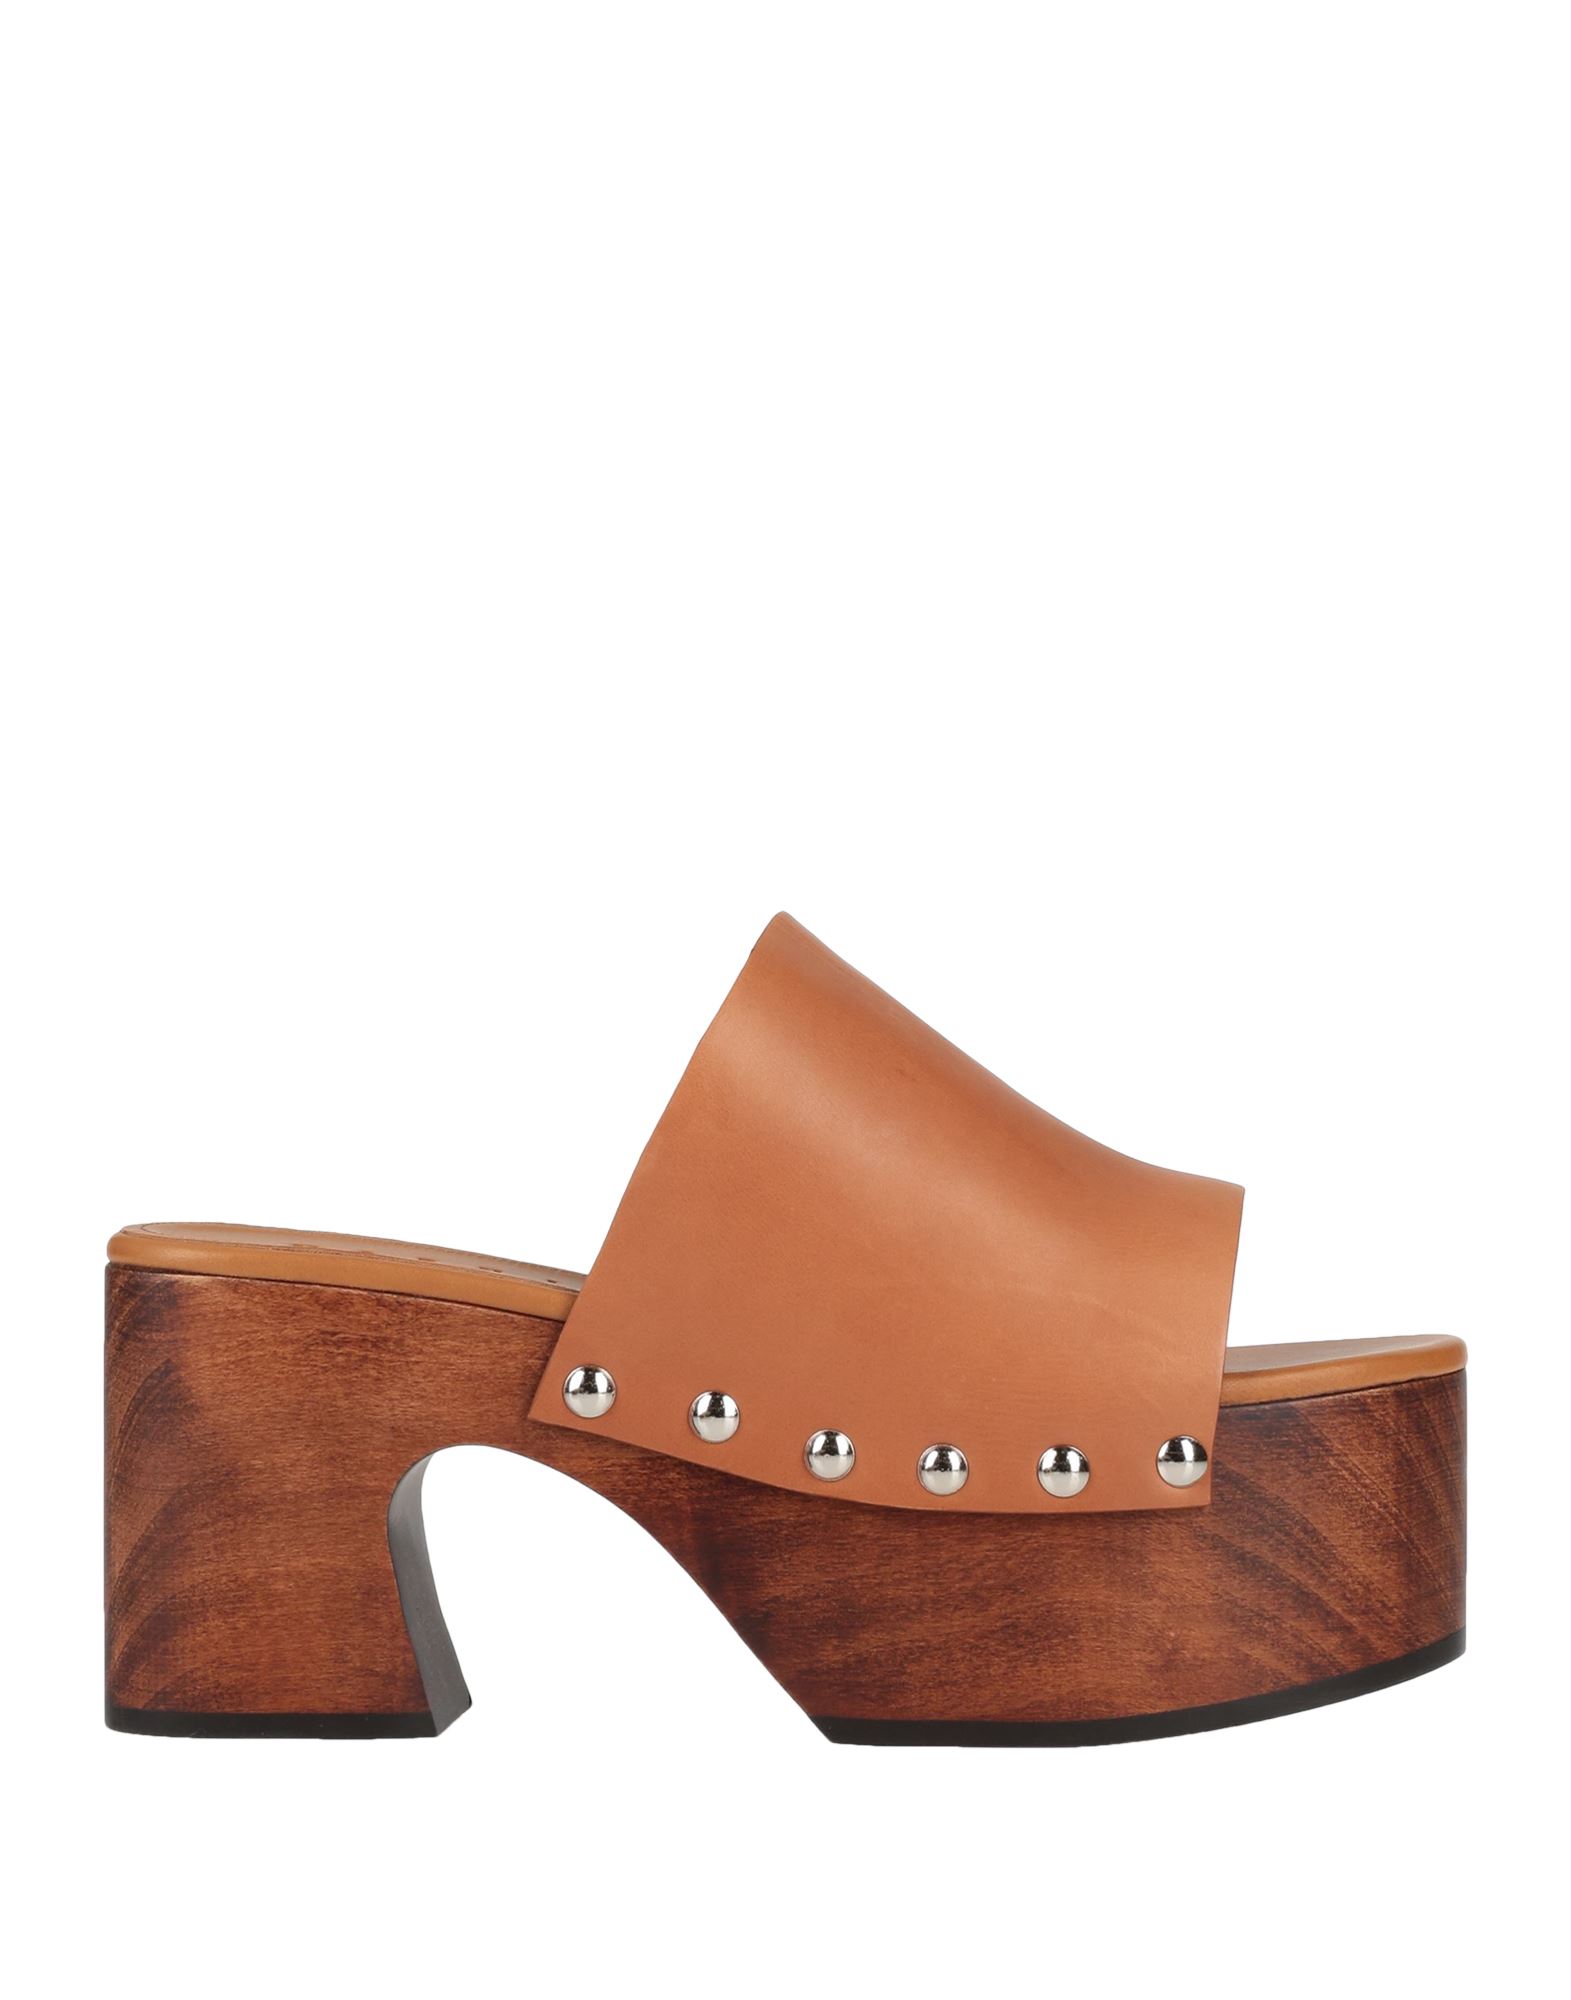 Marni Woman Mules & Clogs Brown Size 6 Soft Leather